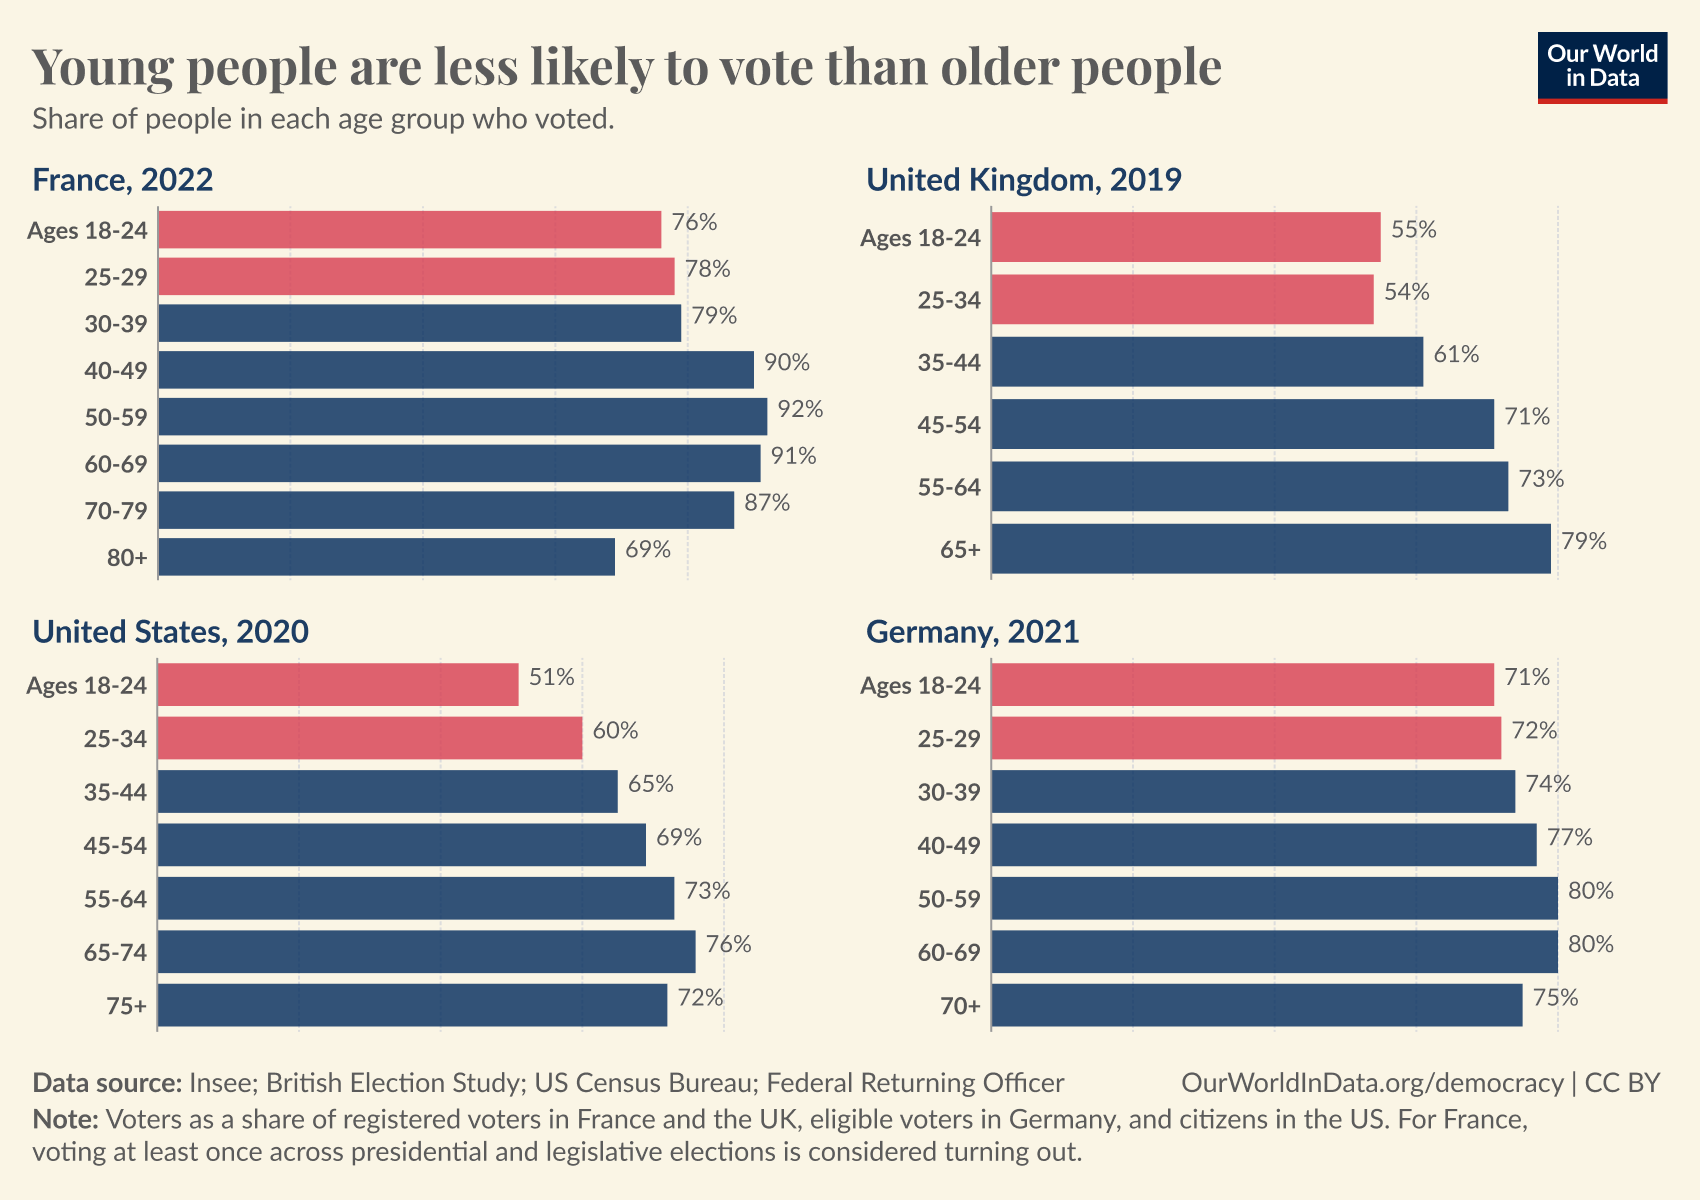 Bar chart titled 'Young people are less likely to vote than older people.' The chart shows the share of people in each age group who voted in France (2022), the United Kingdom (2019), the United States (2020), and Germany (2021). Young people are less likely to vote than older people, often considerably so.